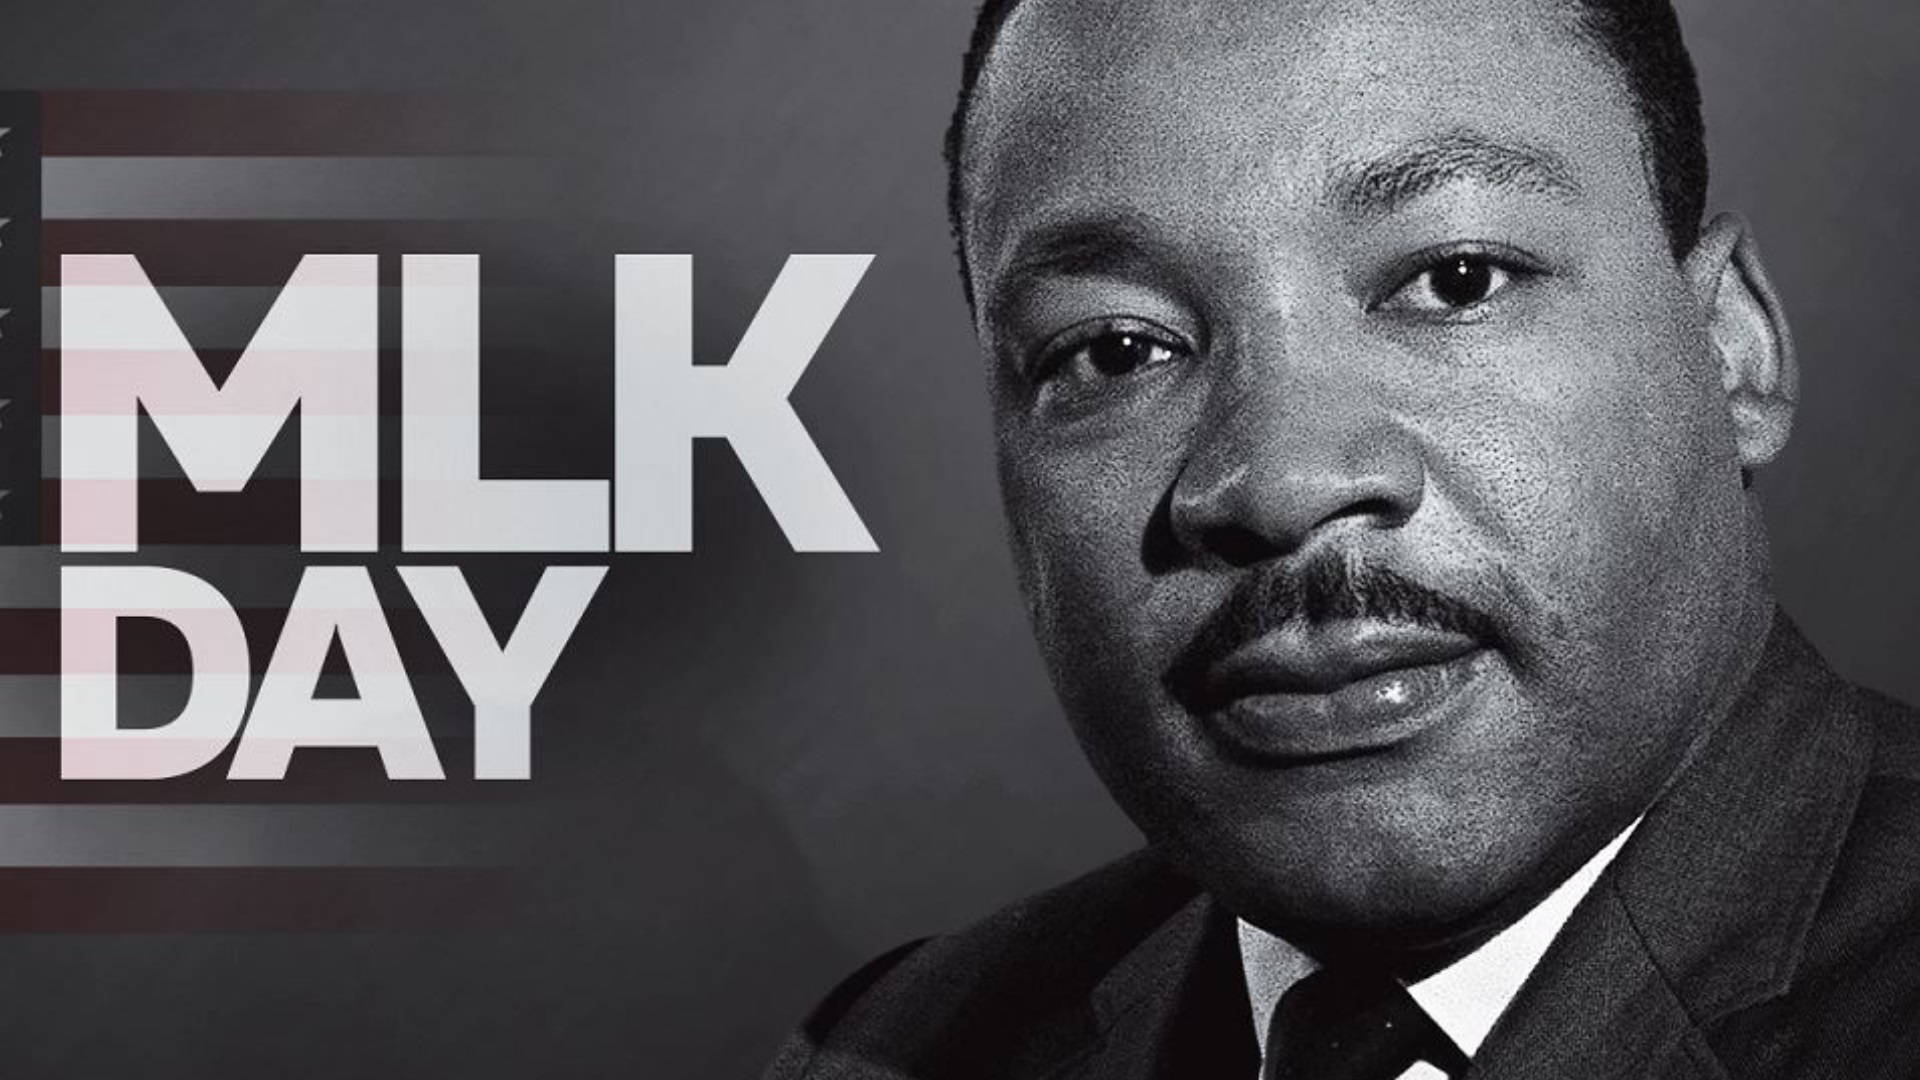 Martin Luther King Jr Day Wallpapers